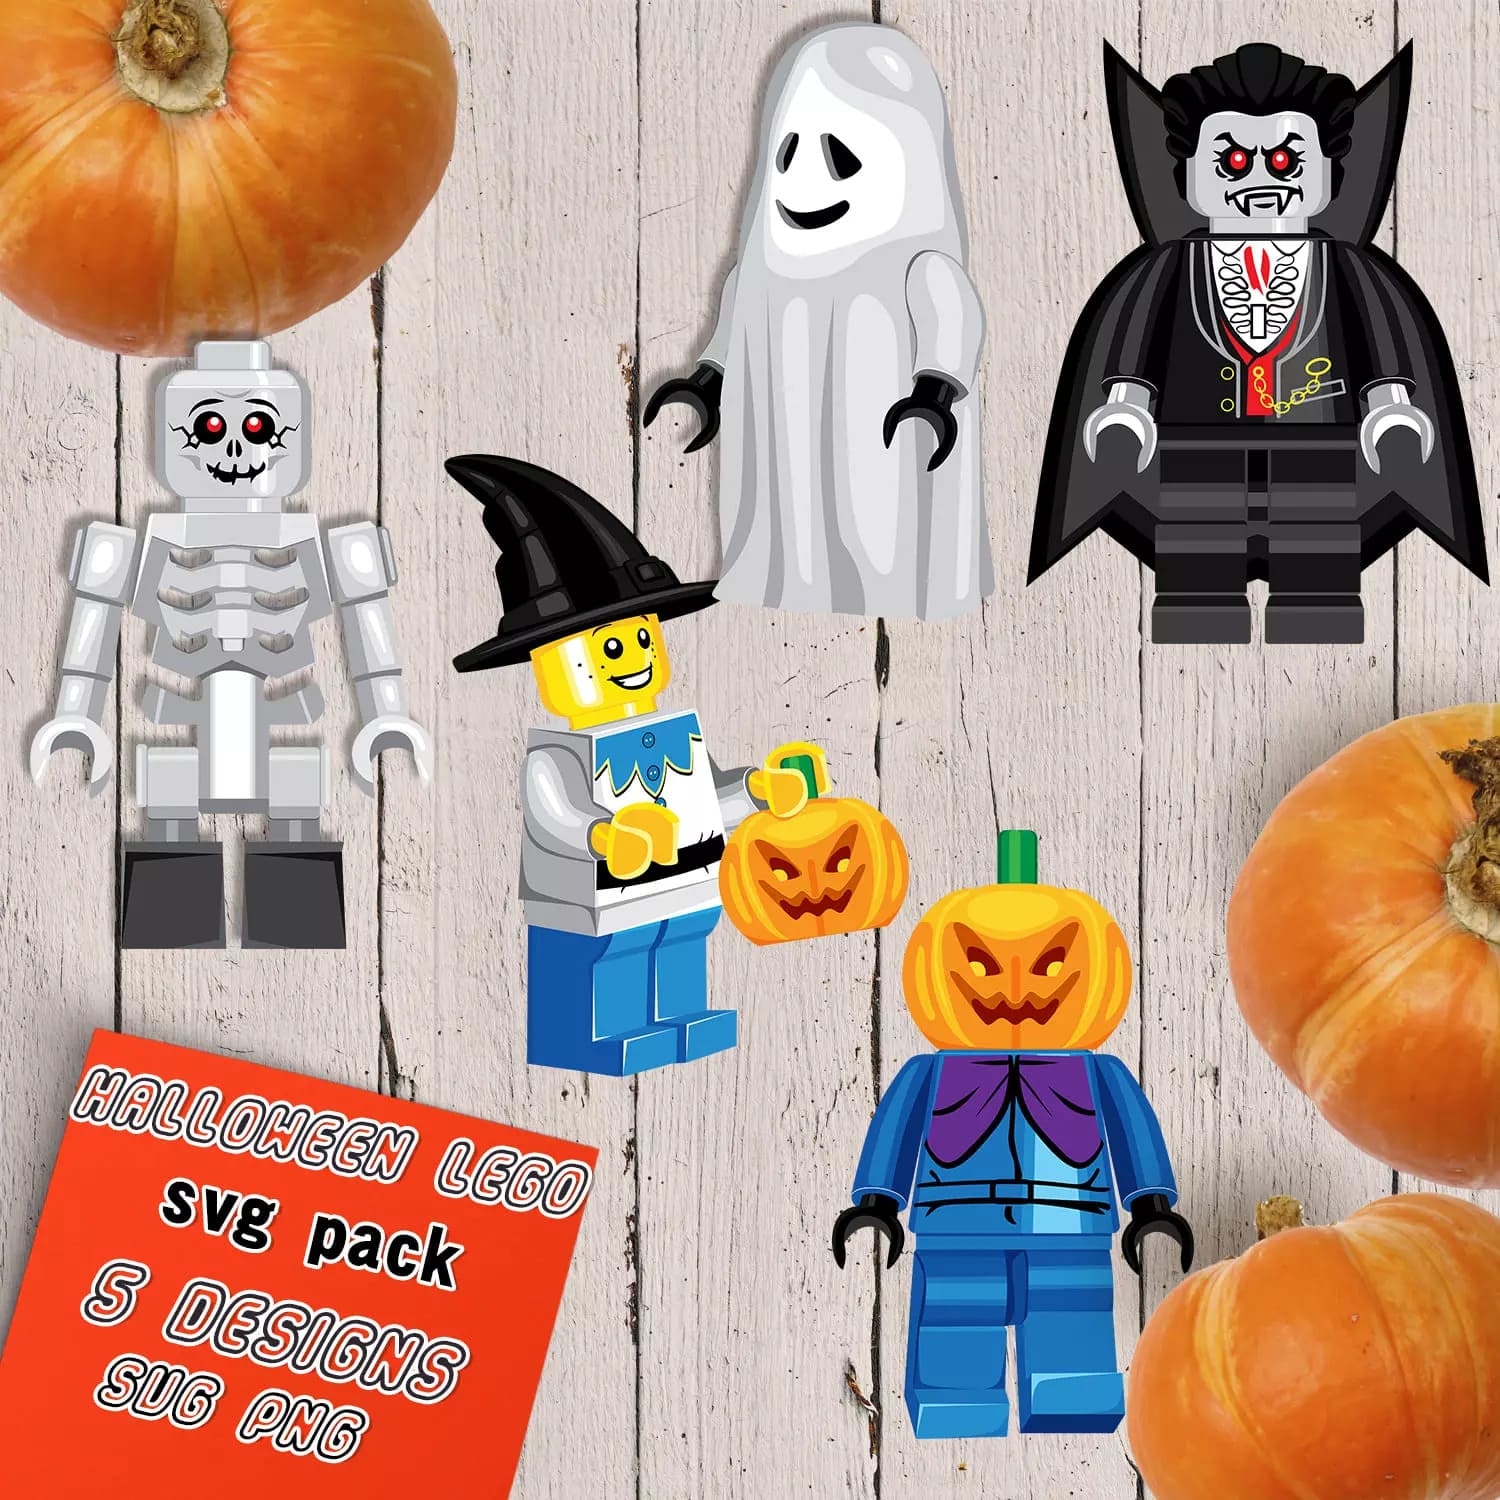 Halloween Lego SVG Preview.